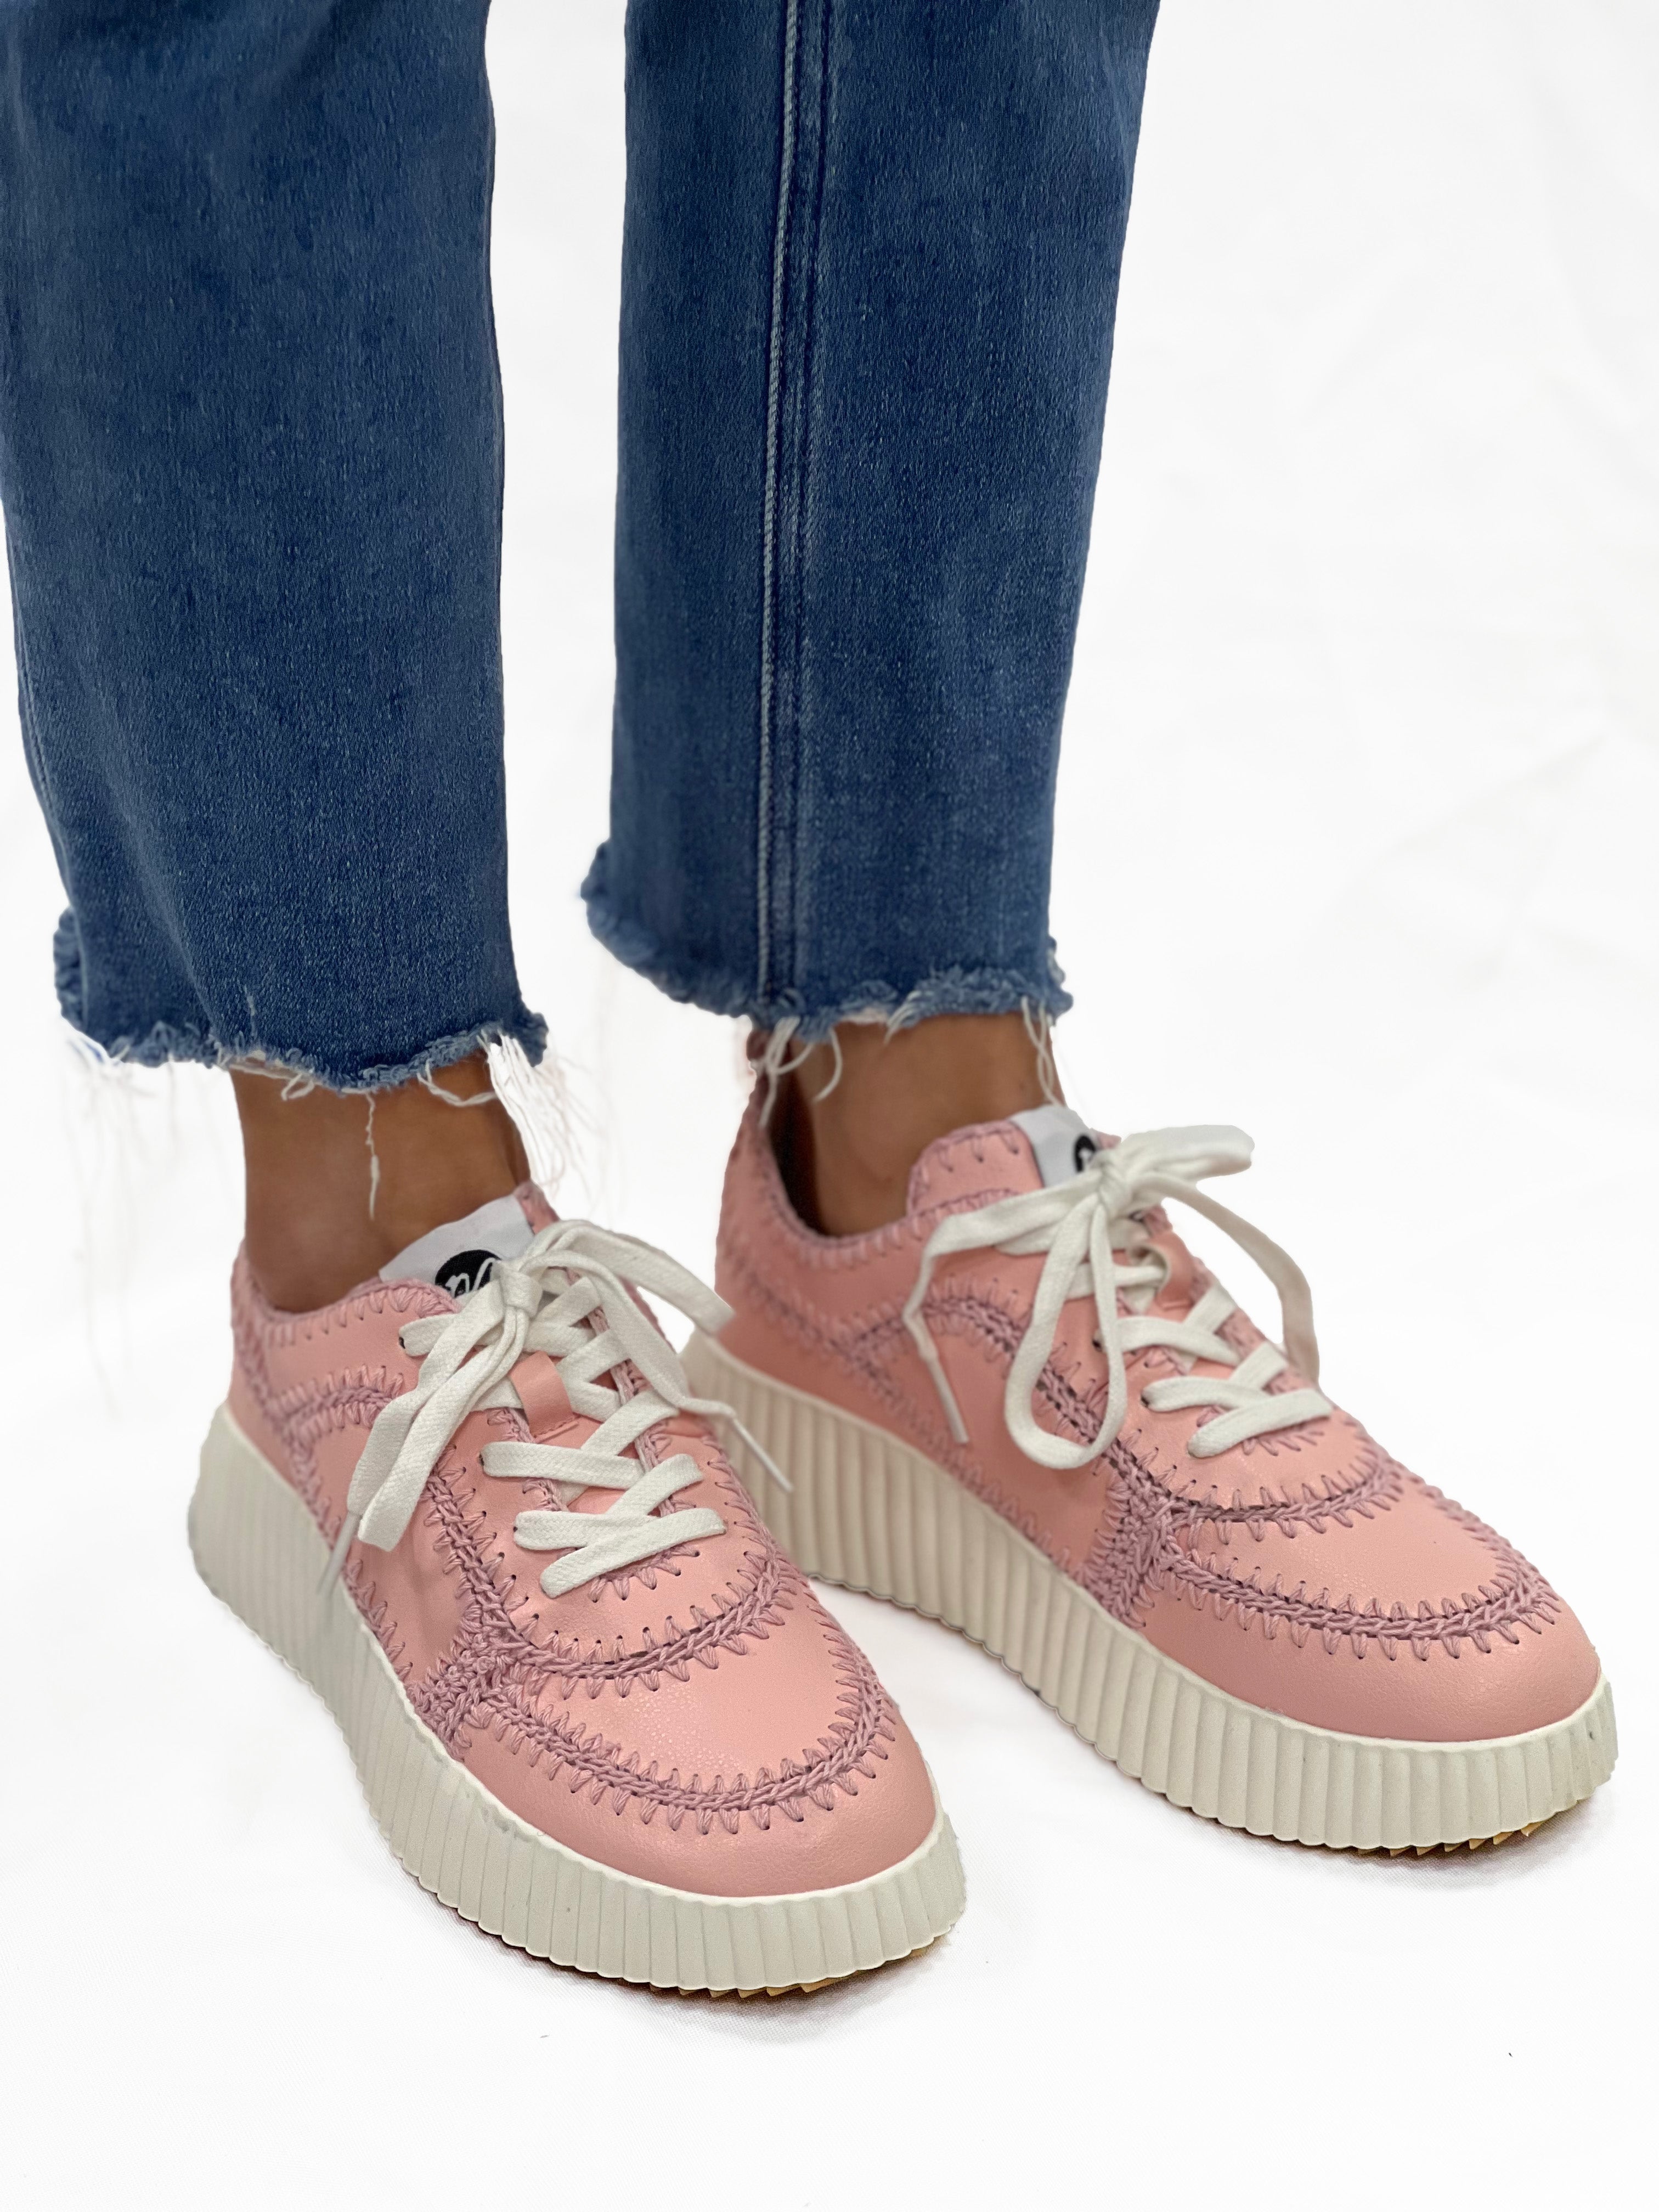 Head Over Heels Boutique - High tops we are LOVING Shop the RILEY by SHU  SHOP Here | Facebook